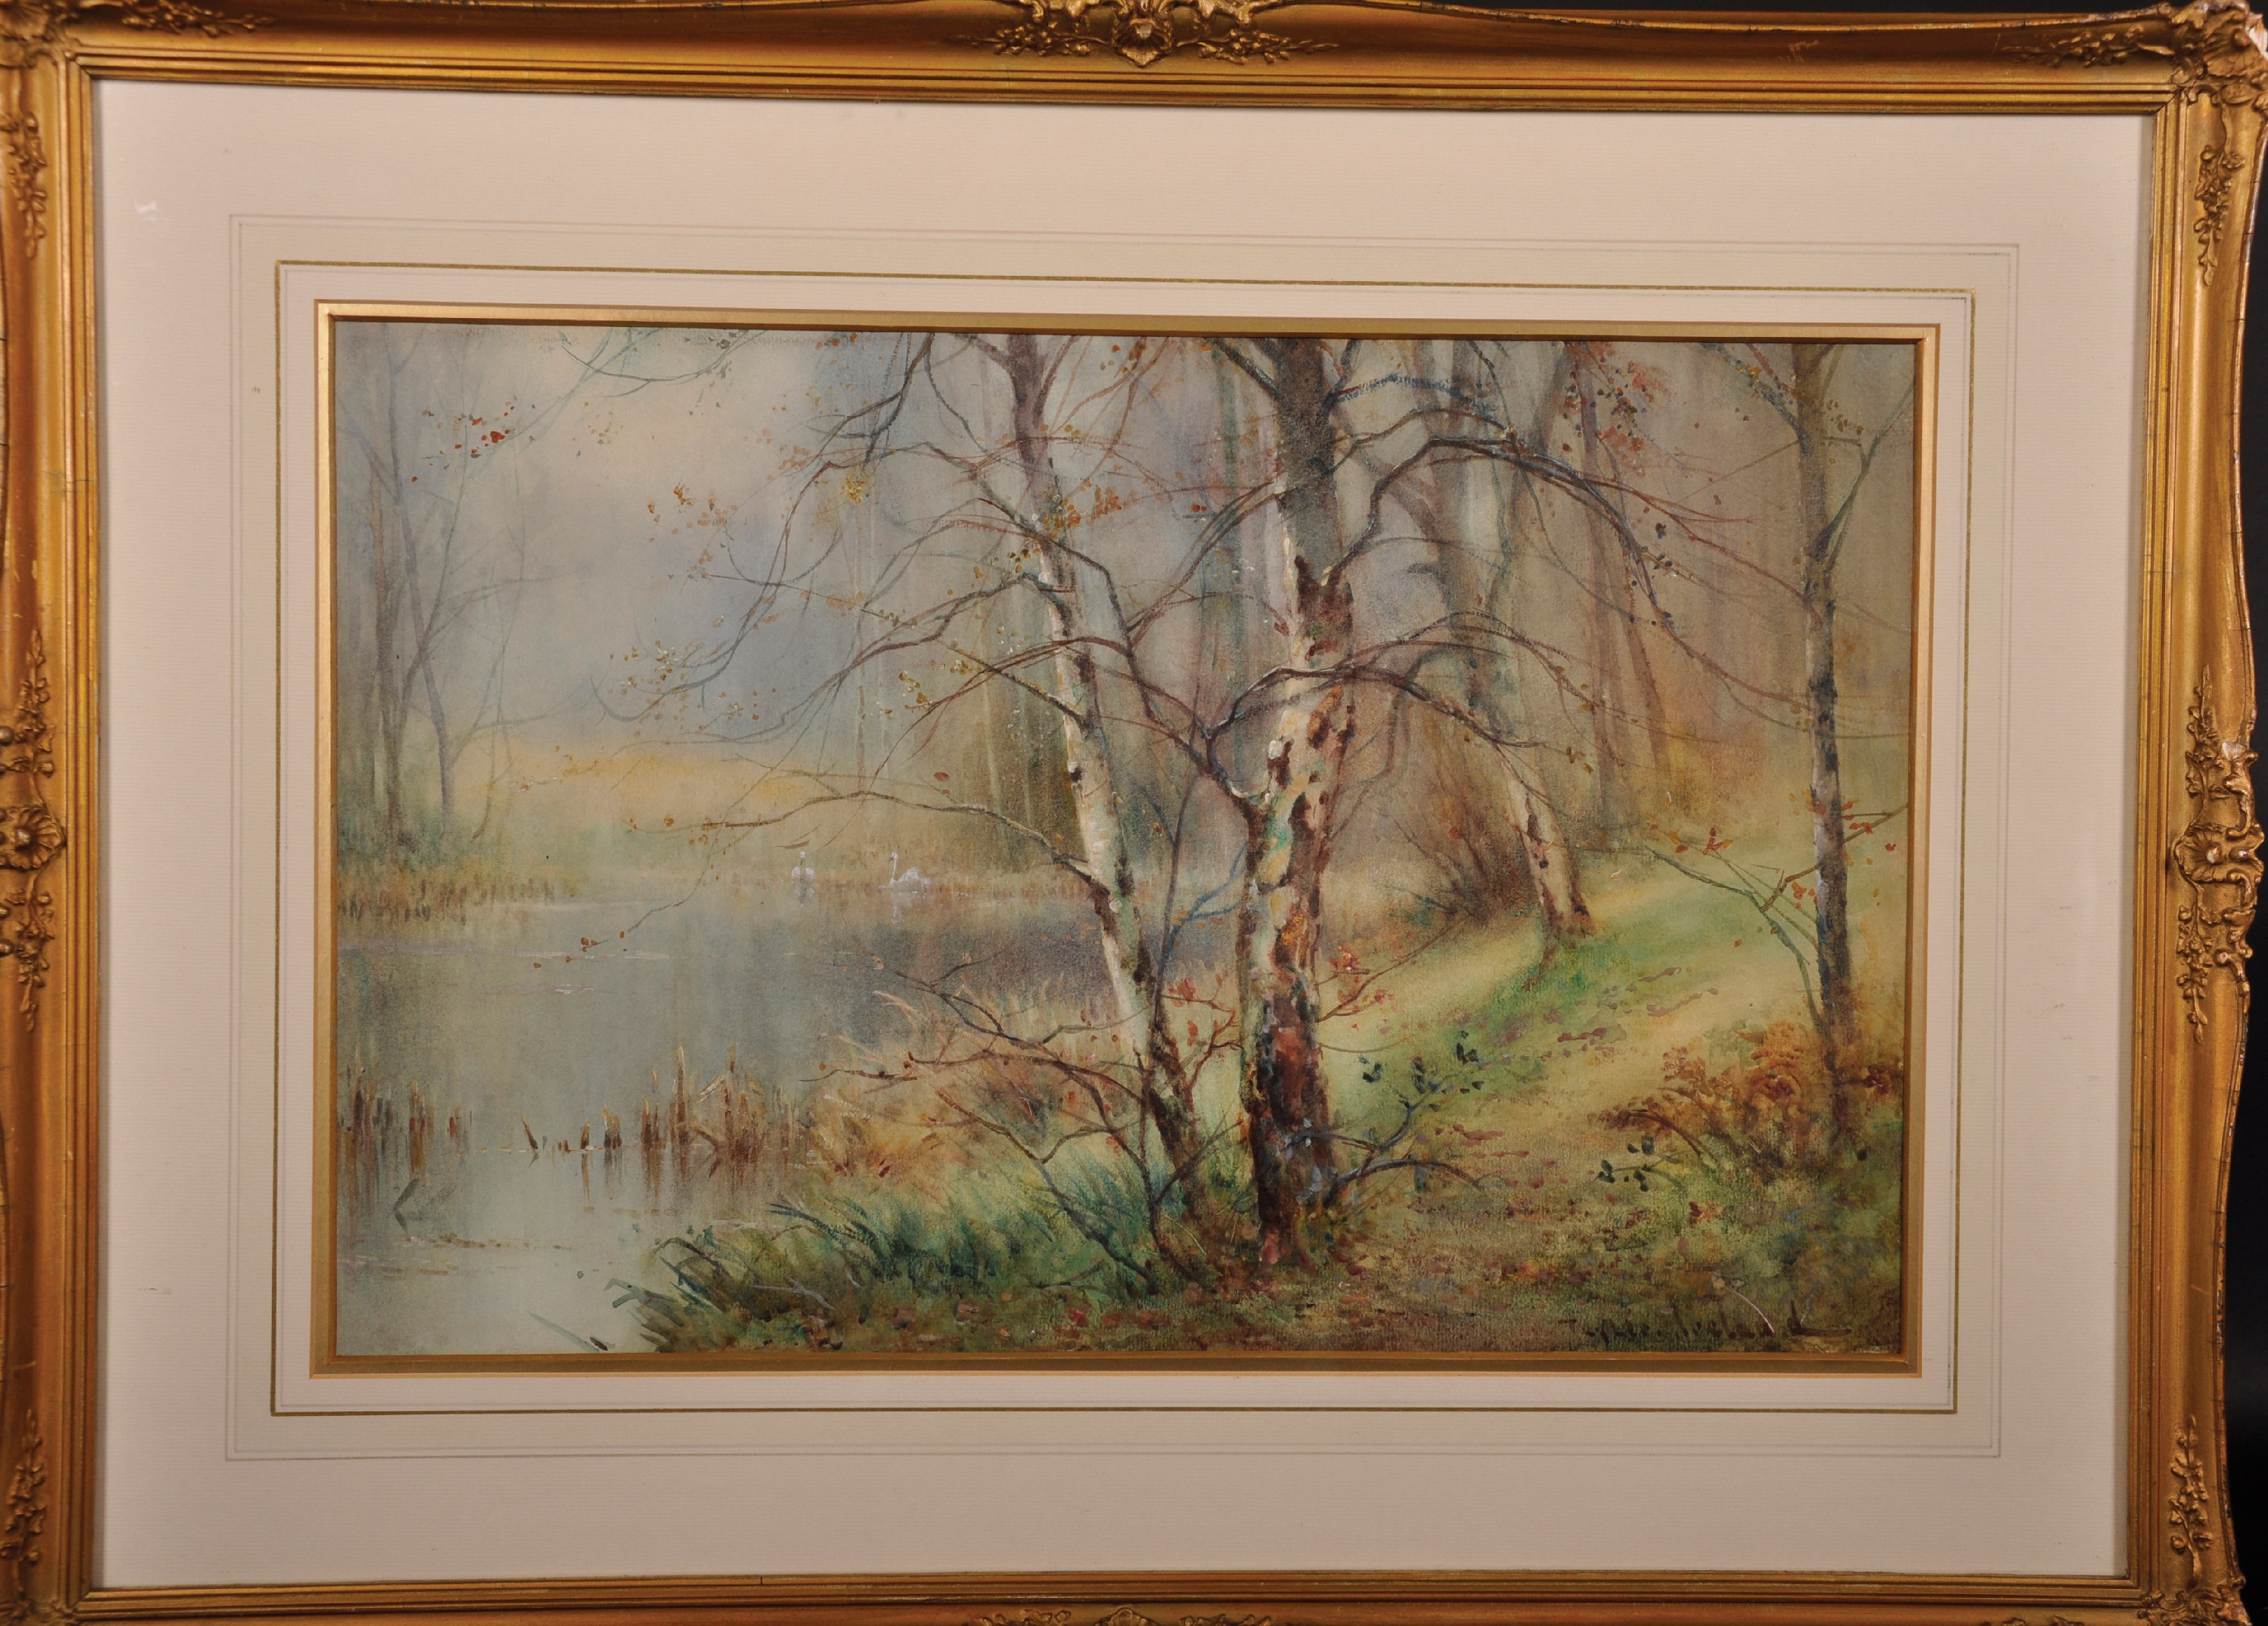 Thomas Taylor Ireland (act.1880-1927) British. A Wooded River Landscape, with Swans in the distance, - Image 2 of 4